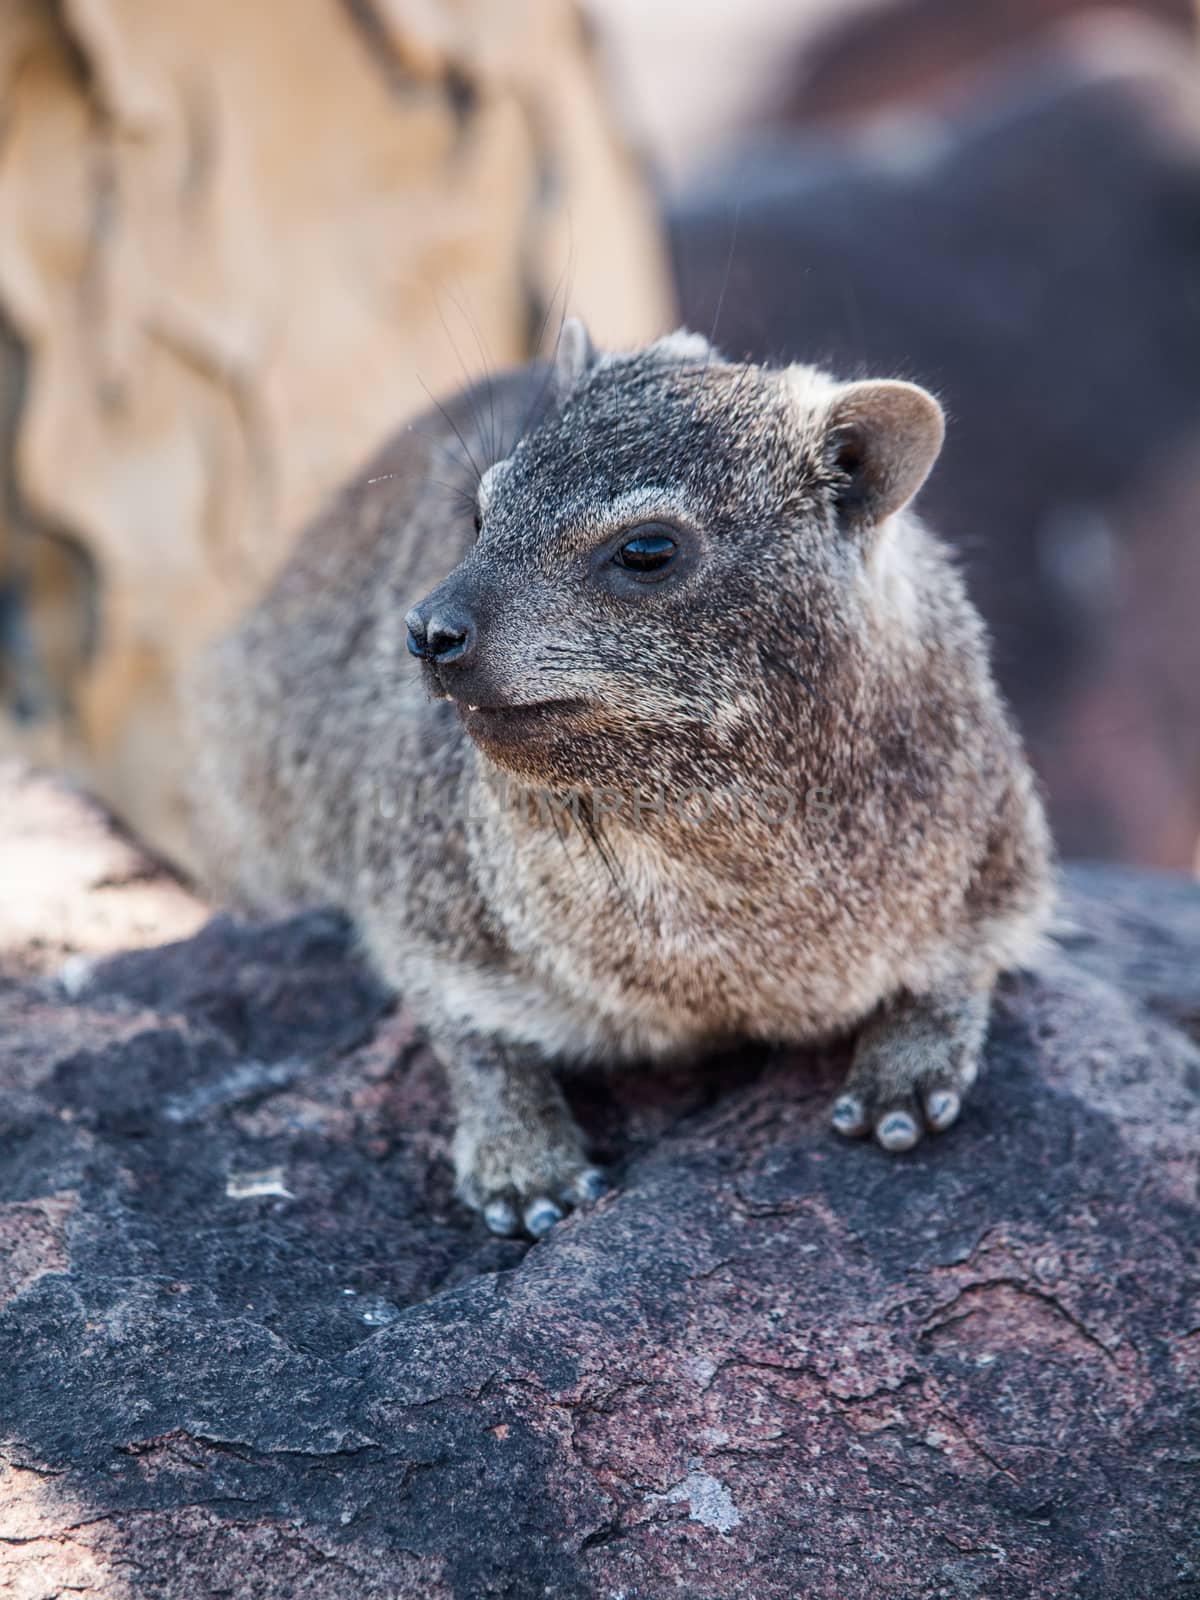 Dassie rat (Petromus typicus) by pyty